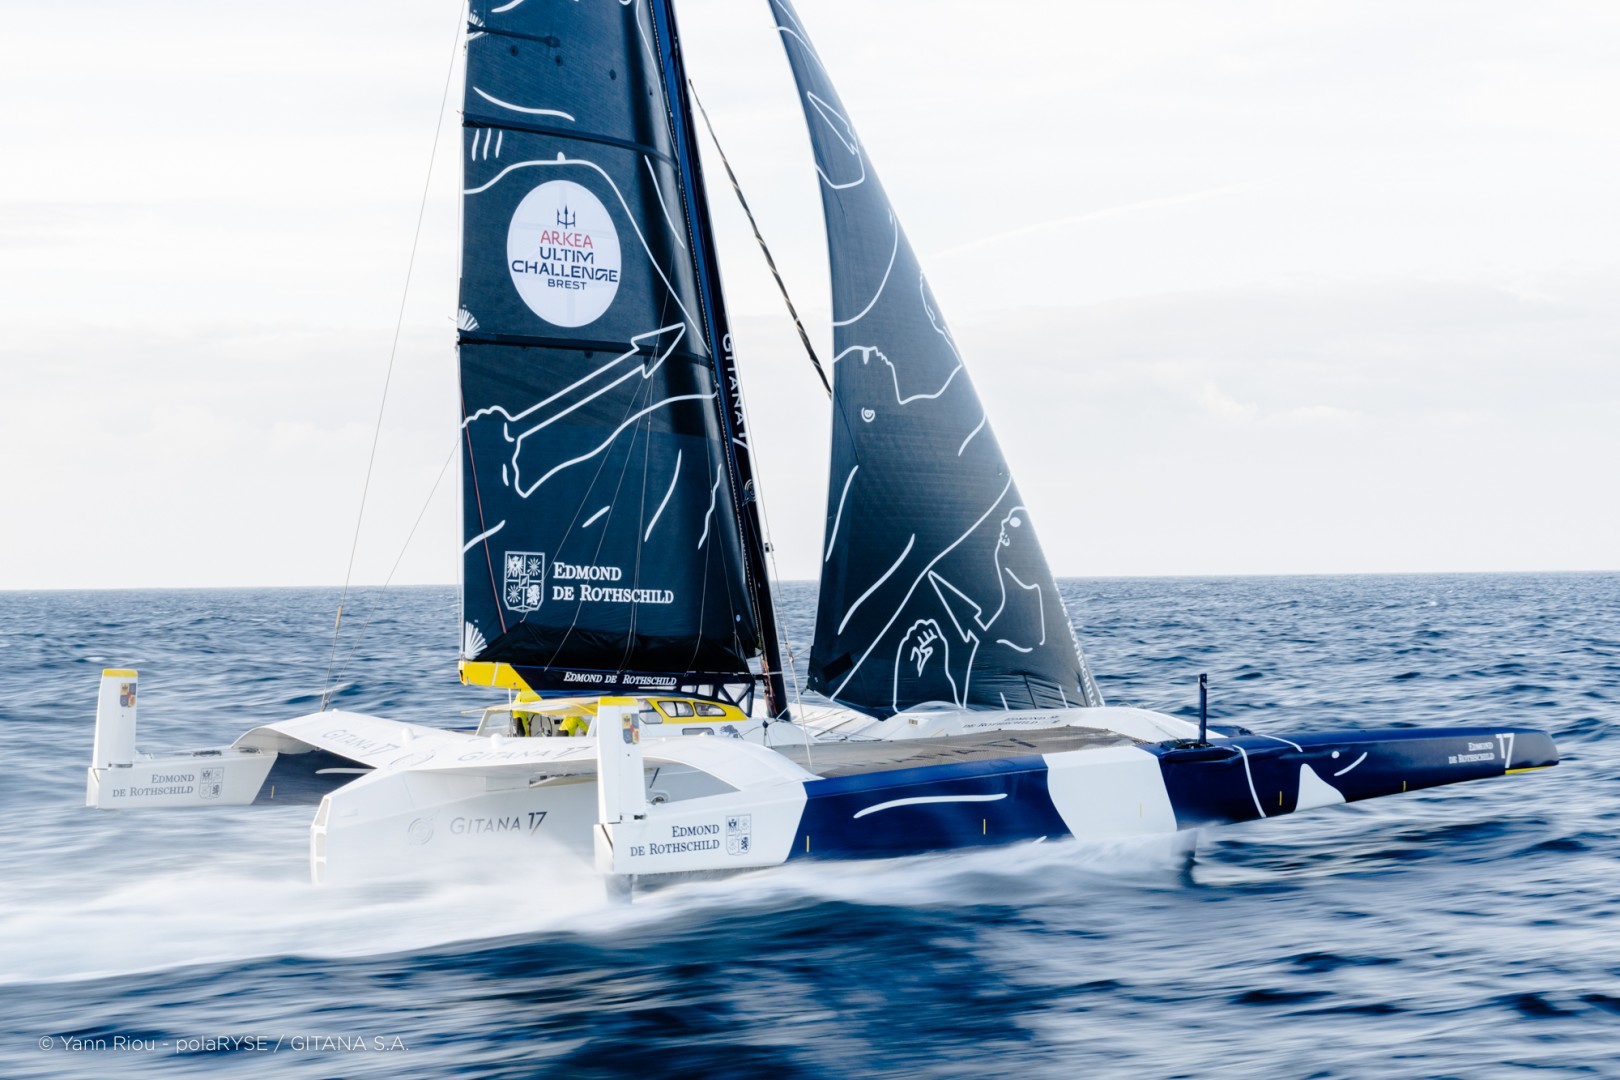 Arkea Ultim Challenge – Brest, From one ocean to the next